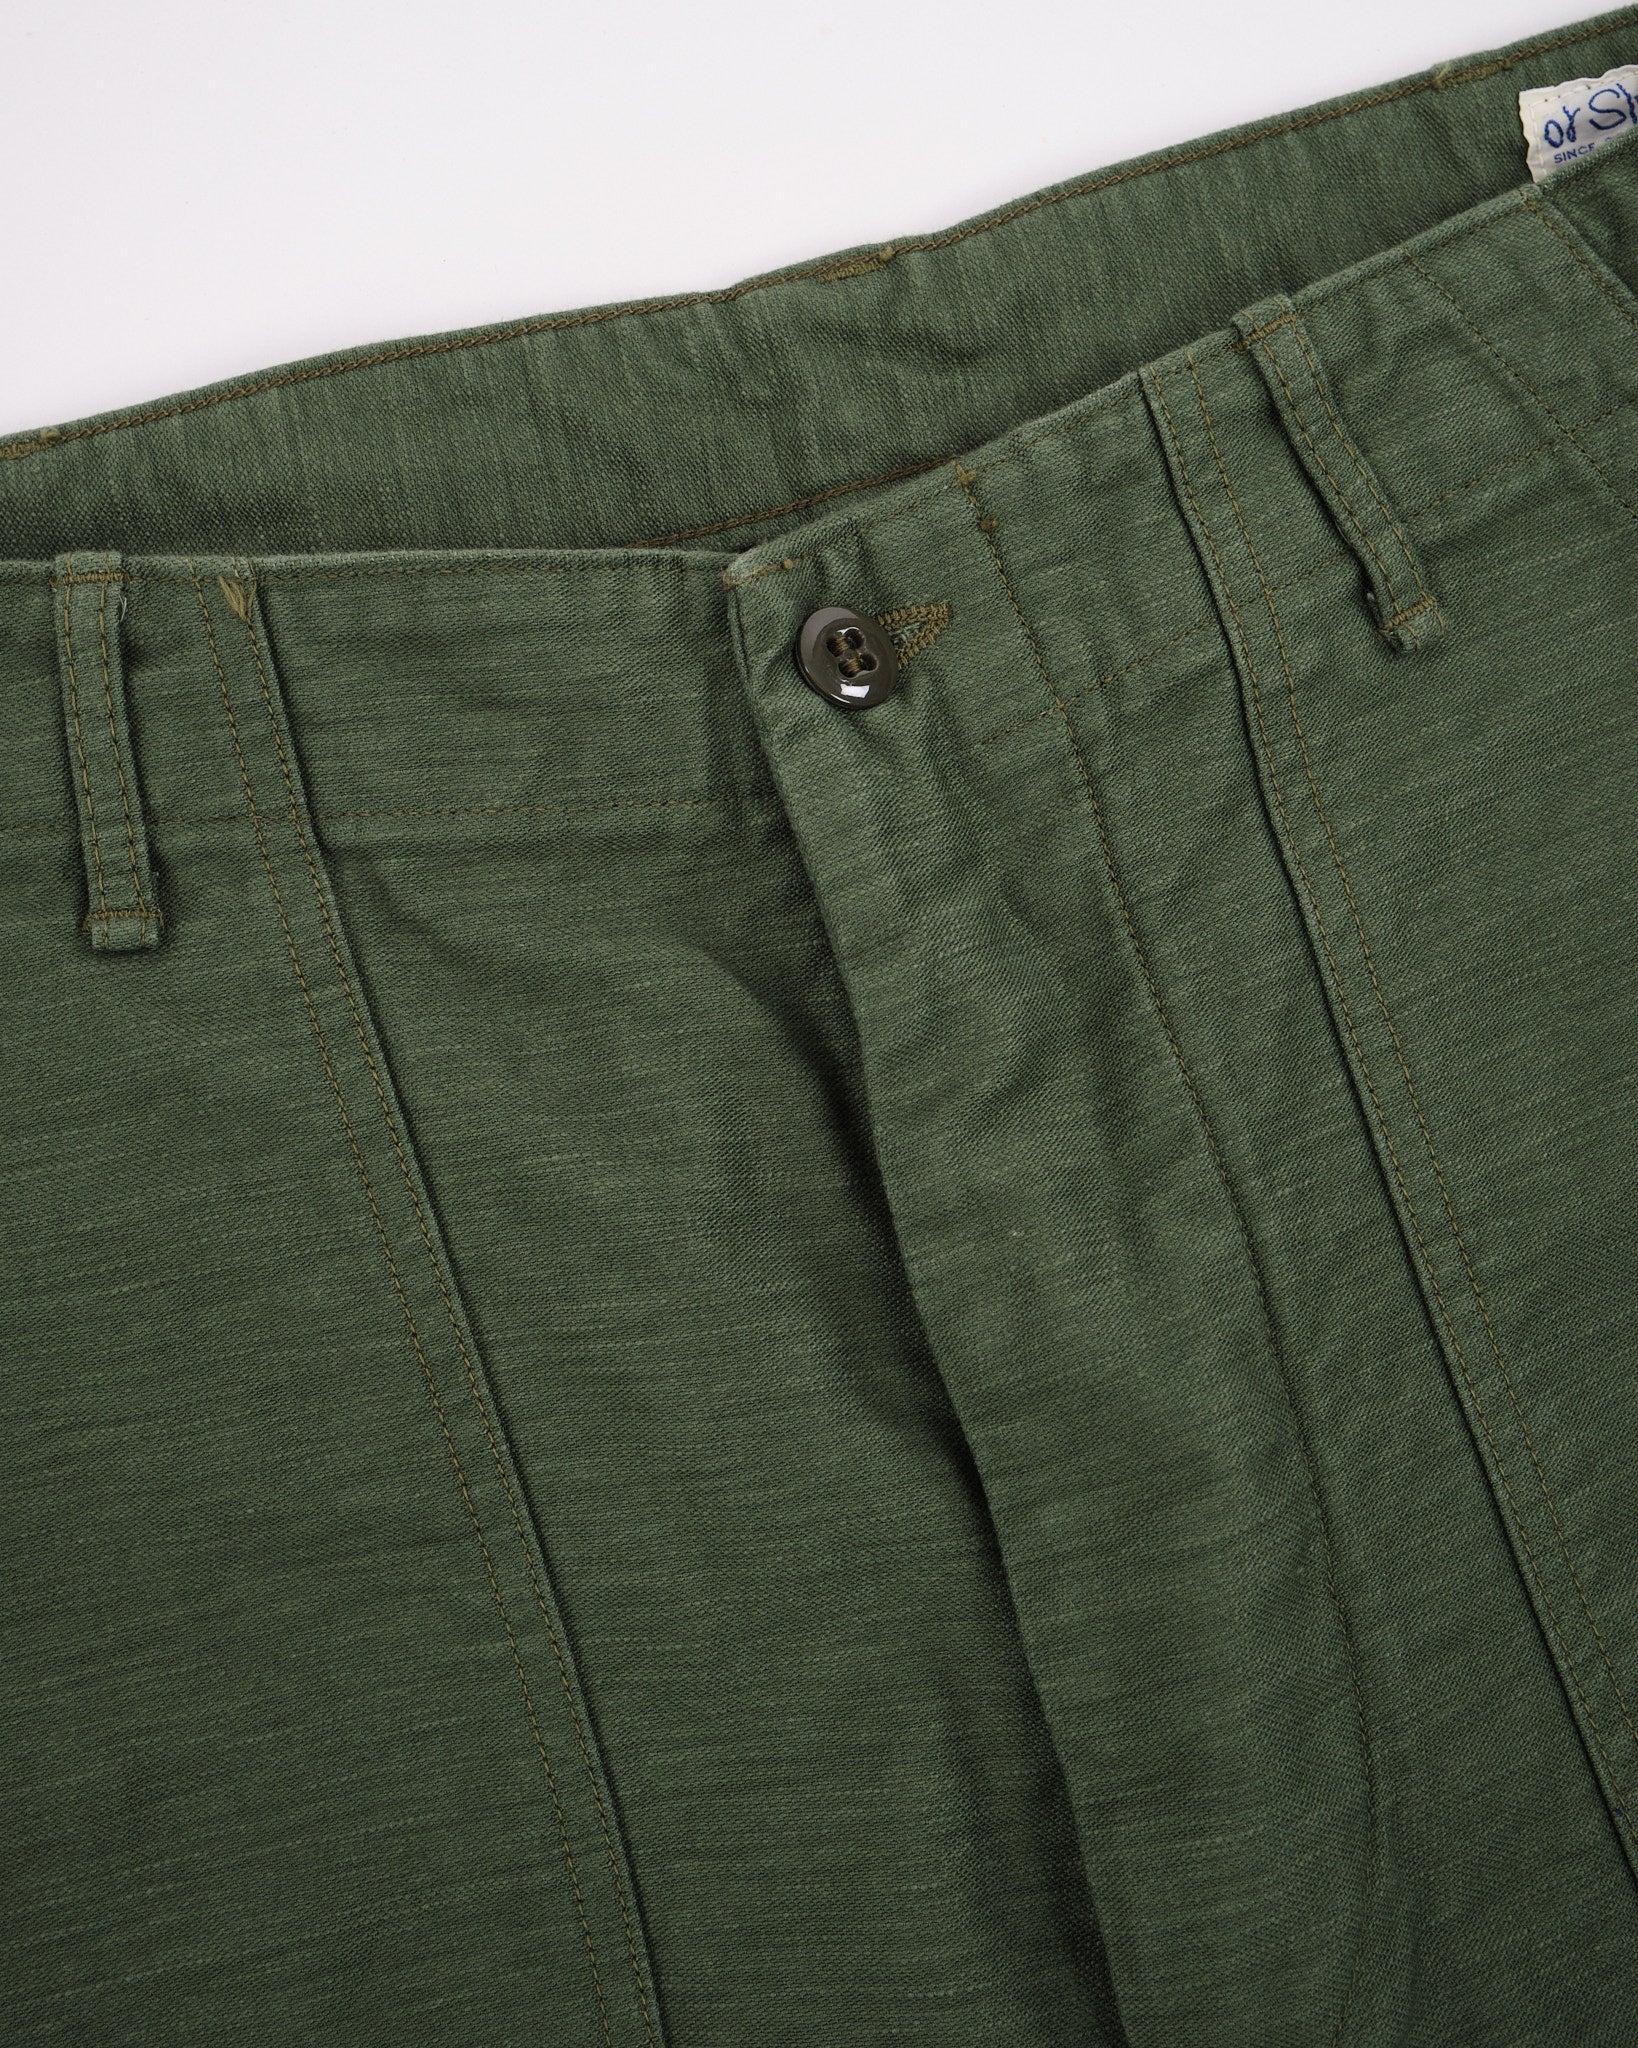 US ARMY FATIGUE PANTS REGULAR FIT GREEN - Meadow